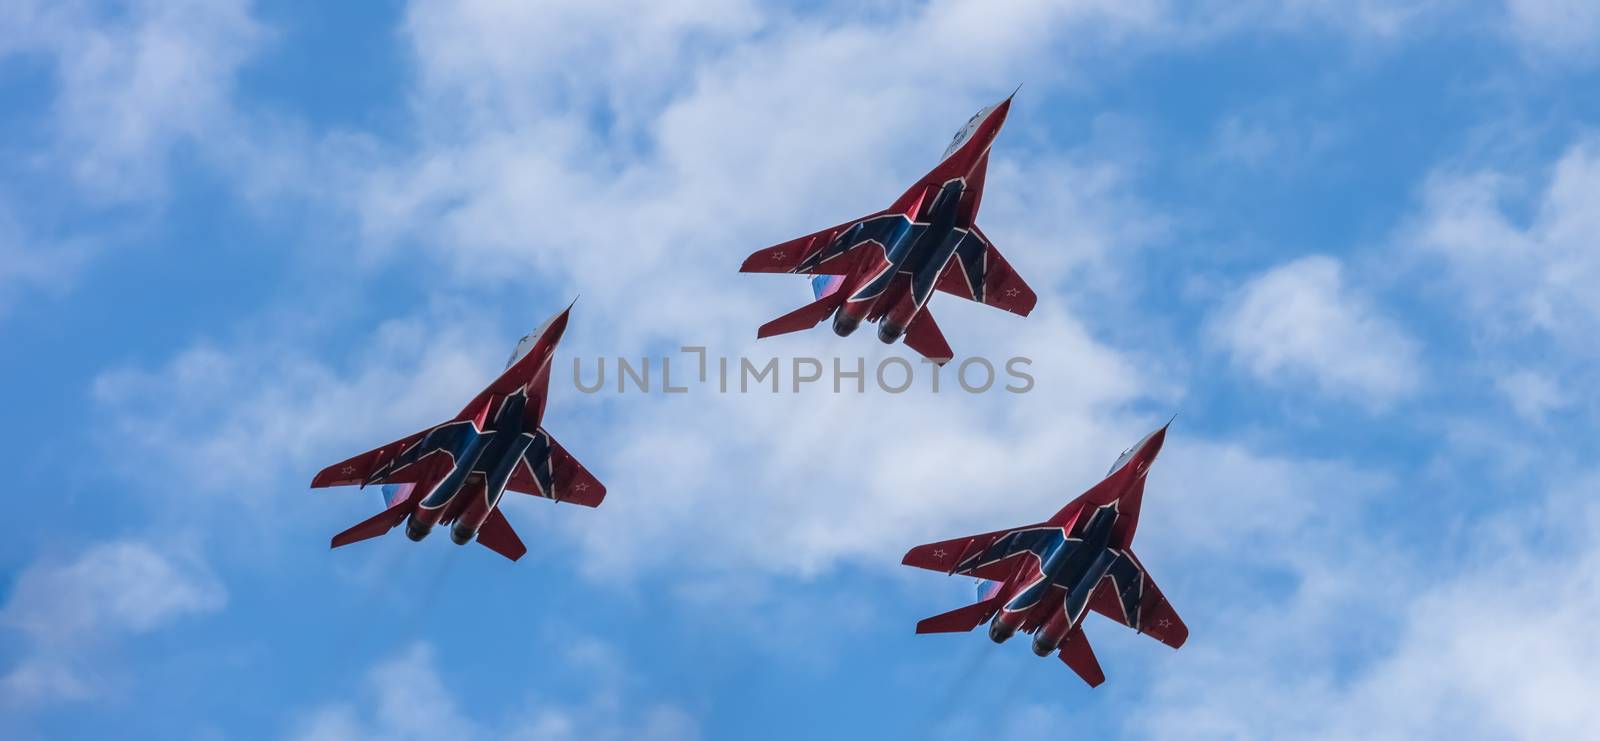 Barnaul, Russia - September 18, 2020: A low angle close-up shot of Strizhi MiG-29 jet squadron performing stunts during an aeroshow. Blue cloudy sky as a background.